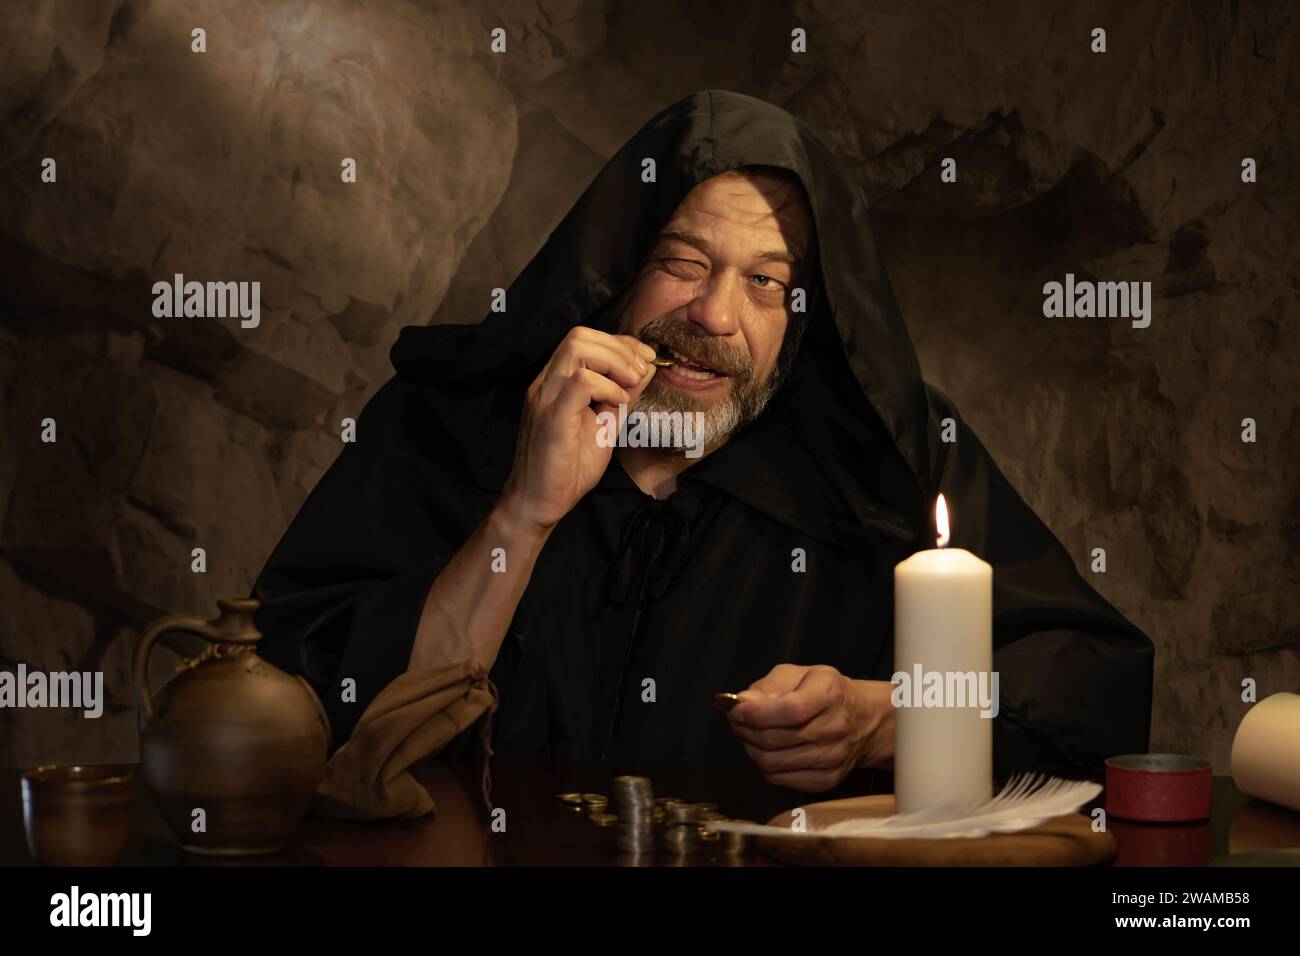 A monk authenticates money by candlelight in a dark stone room, stacks of coins. Concept: tax collector in the Middle Ages, church treasurer. Stock Photo